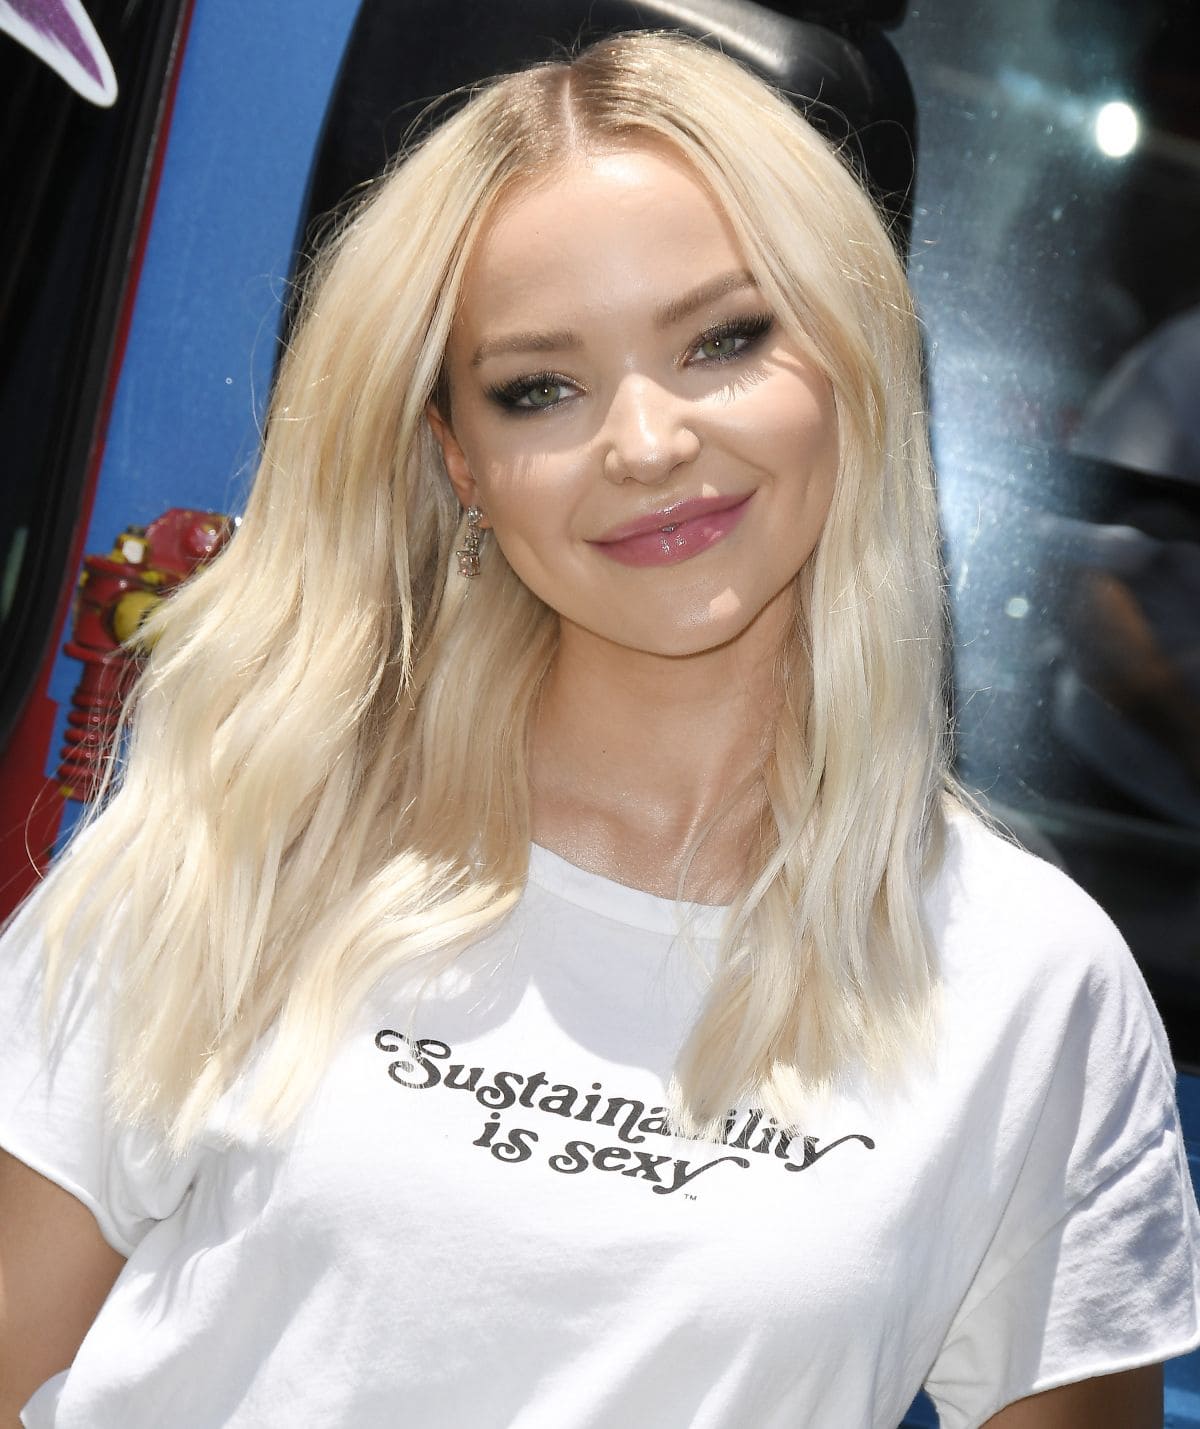 Dove Cameron 2019 Wallpapers